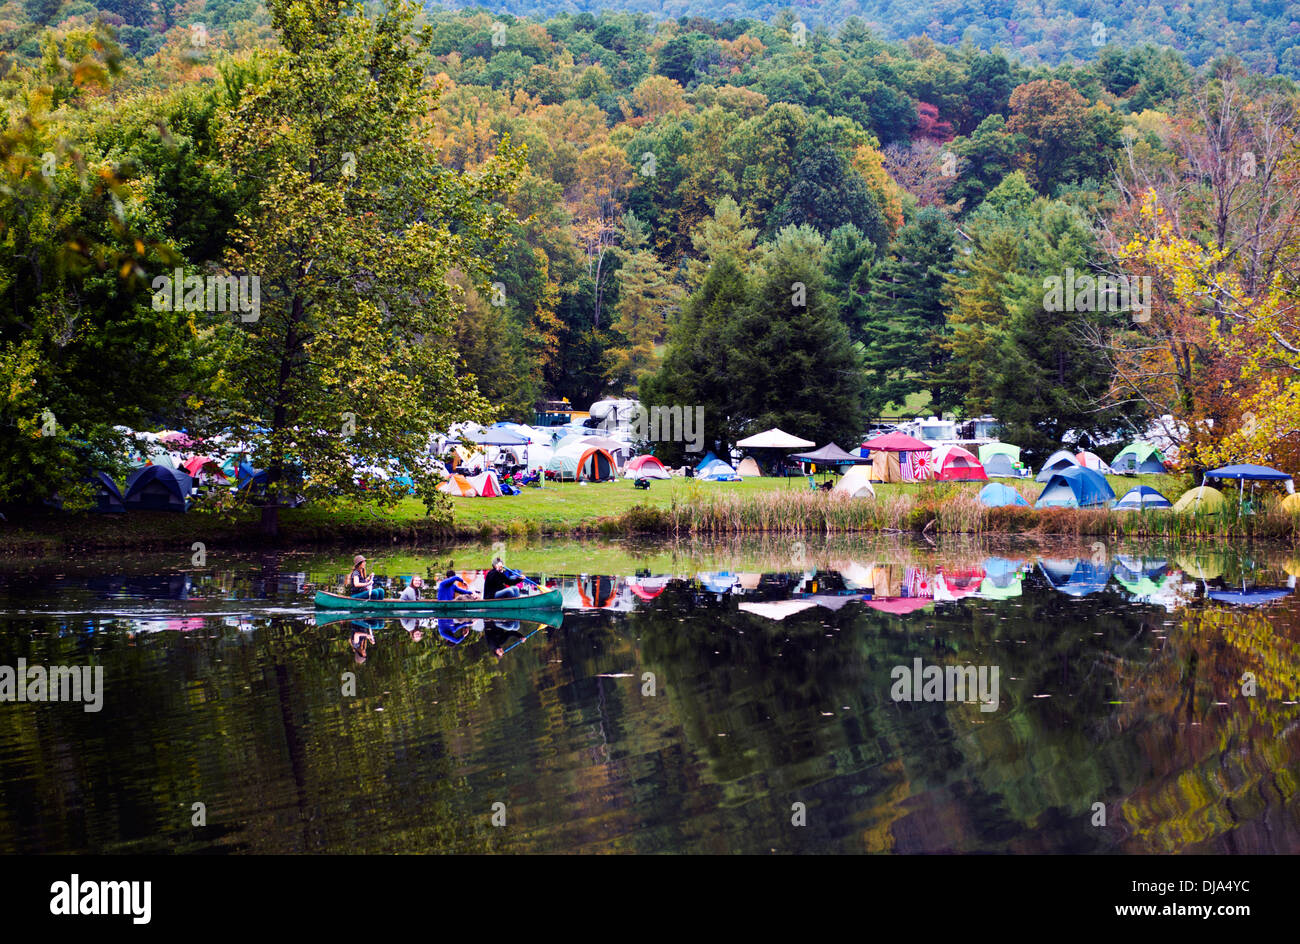 Campers and people canoing at The Leaf Festival (Lake Eden Arts Festival), Black Mountain North Carolina. Stock Photo